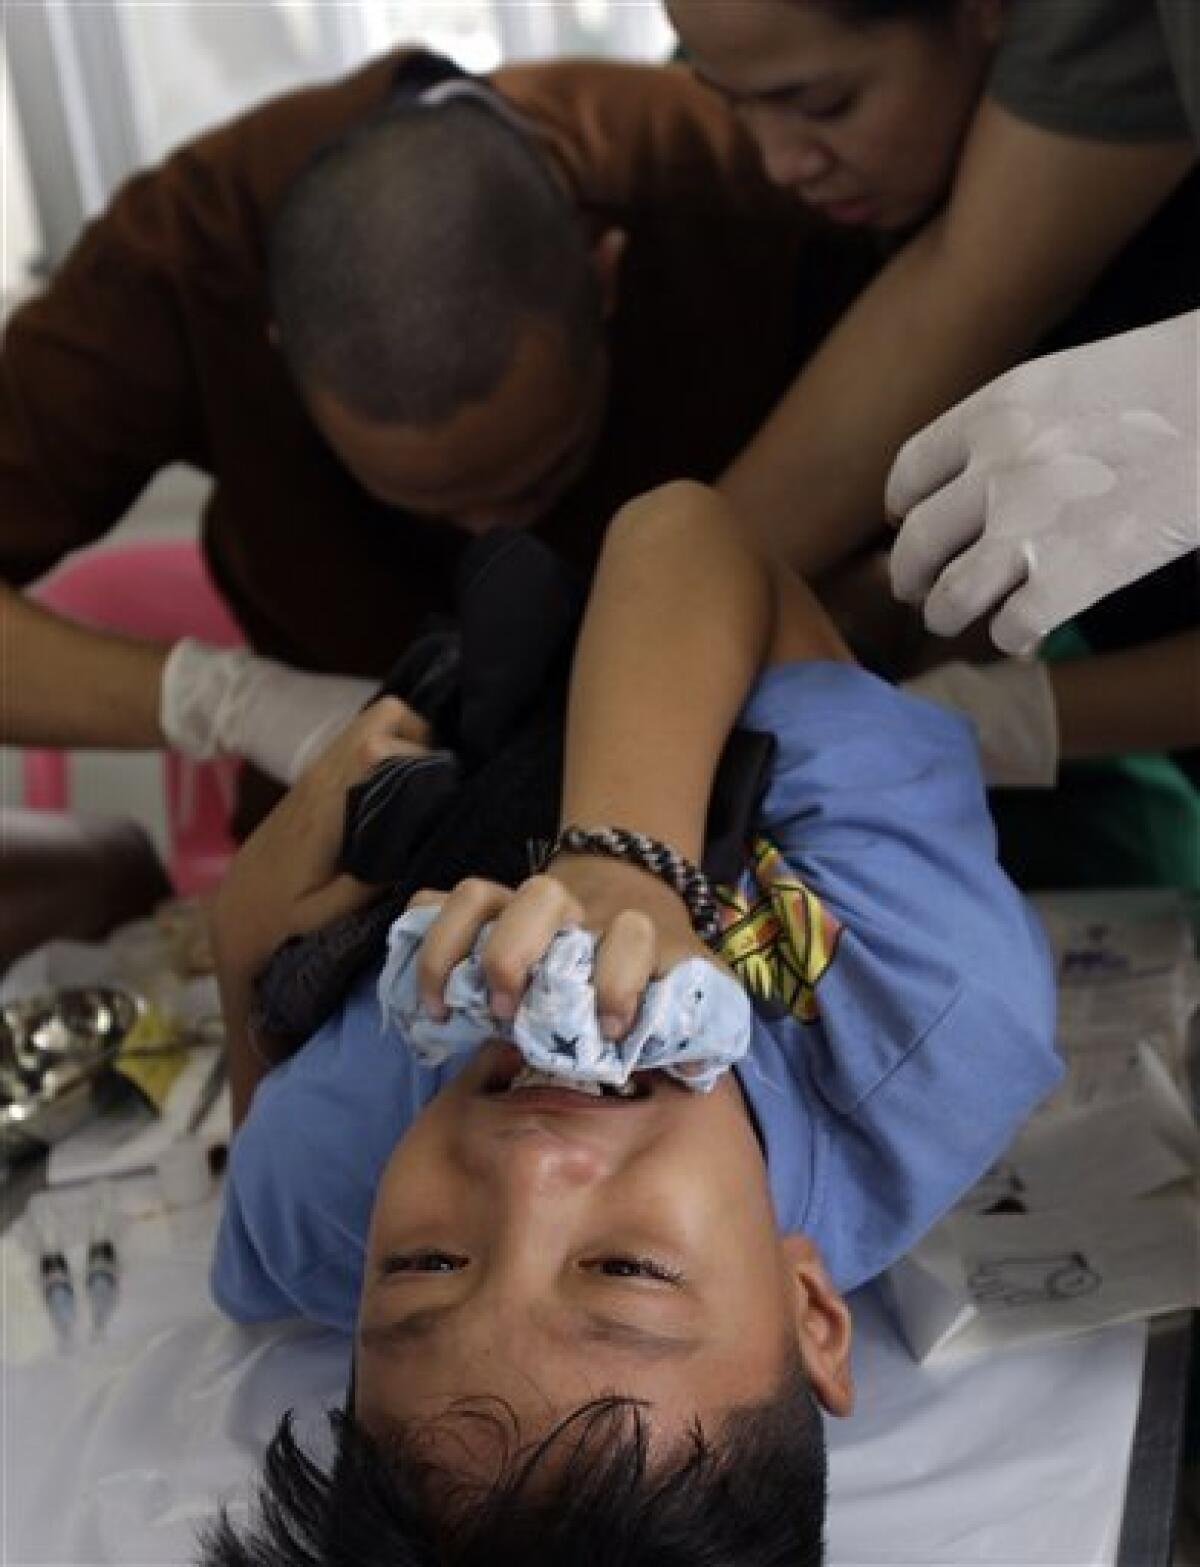 A boy tries to control himself as doctors work on him during a free circumcision surgery Saturday, May 7, 2011, in Marikina city, east of Manila, Philippines. Officials say hundreds of boys in a Philippine city have turned out for a day-long "circumcision party" that aims to break the world record for the most number of participants in a circumcision event. (AP Photo/Pat Roque)